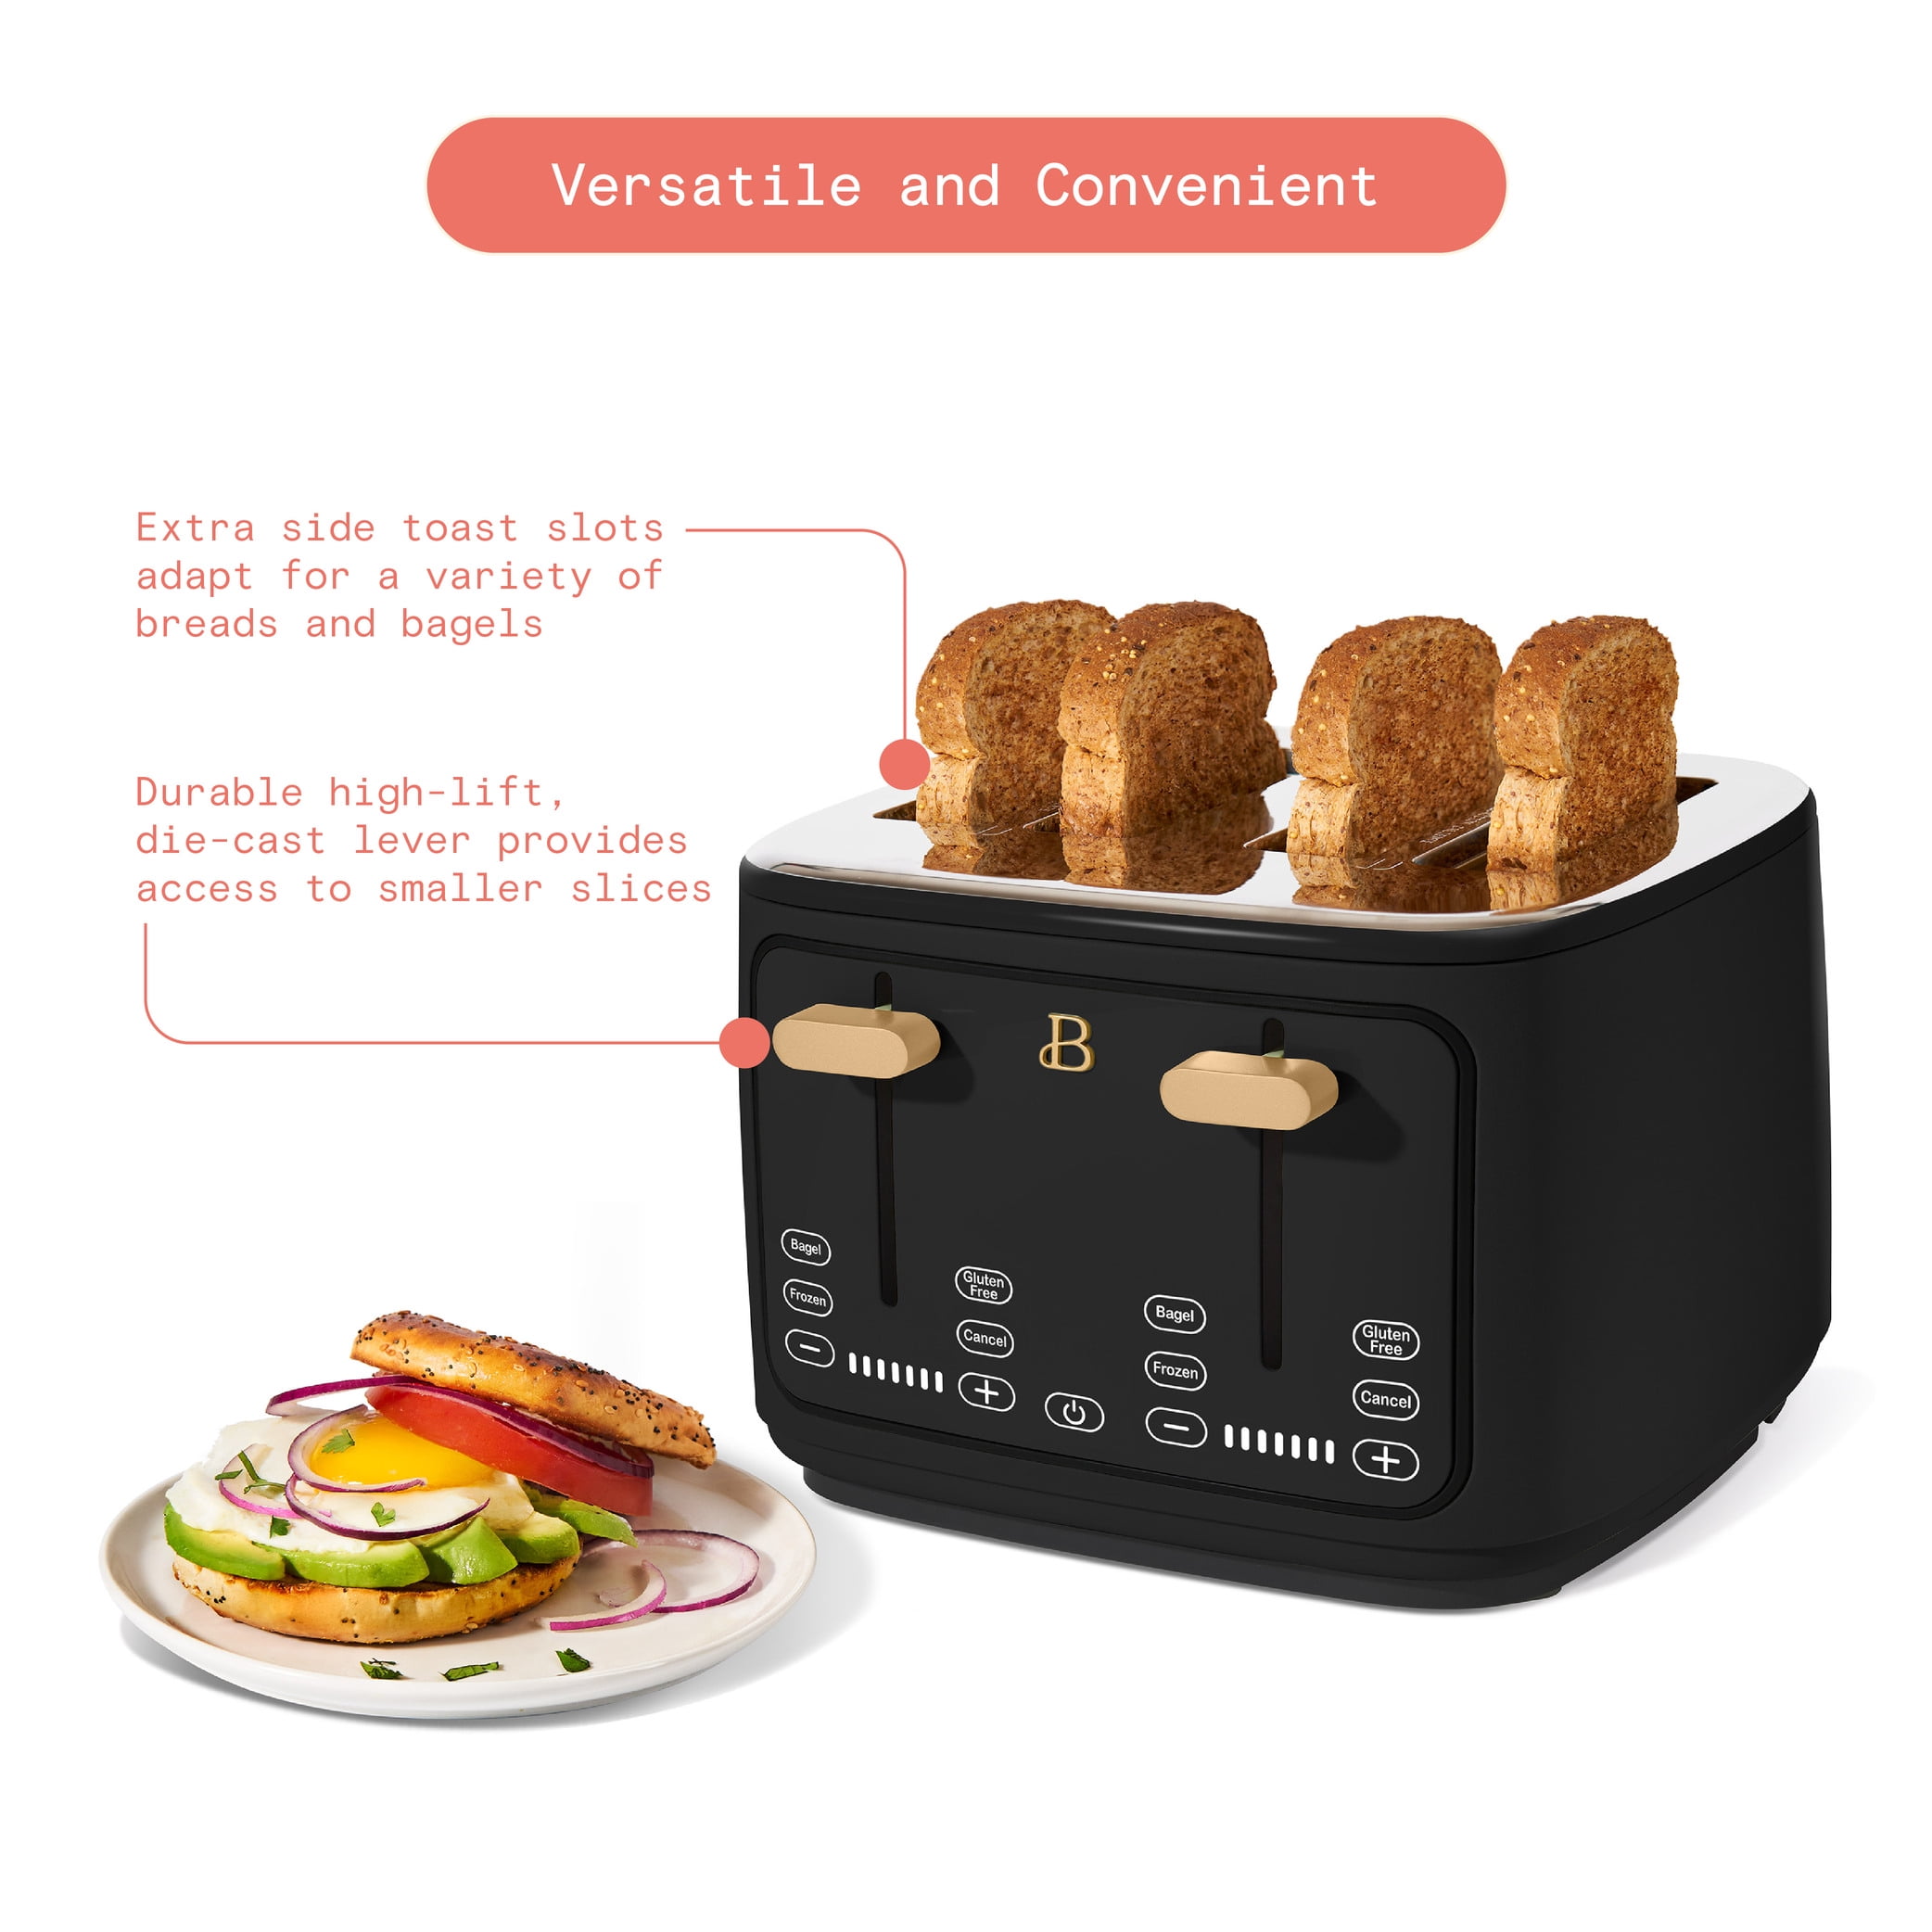 Sage The A Bit More Toaster 4 Slice review: stylish toasting for  sophisticated breakfast clubbers